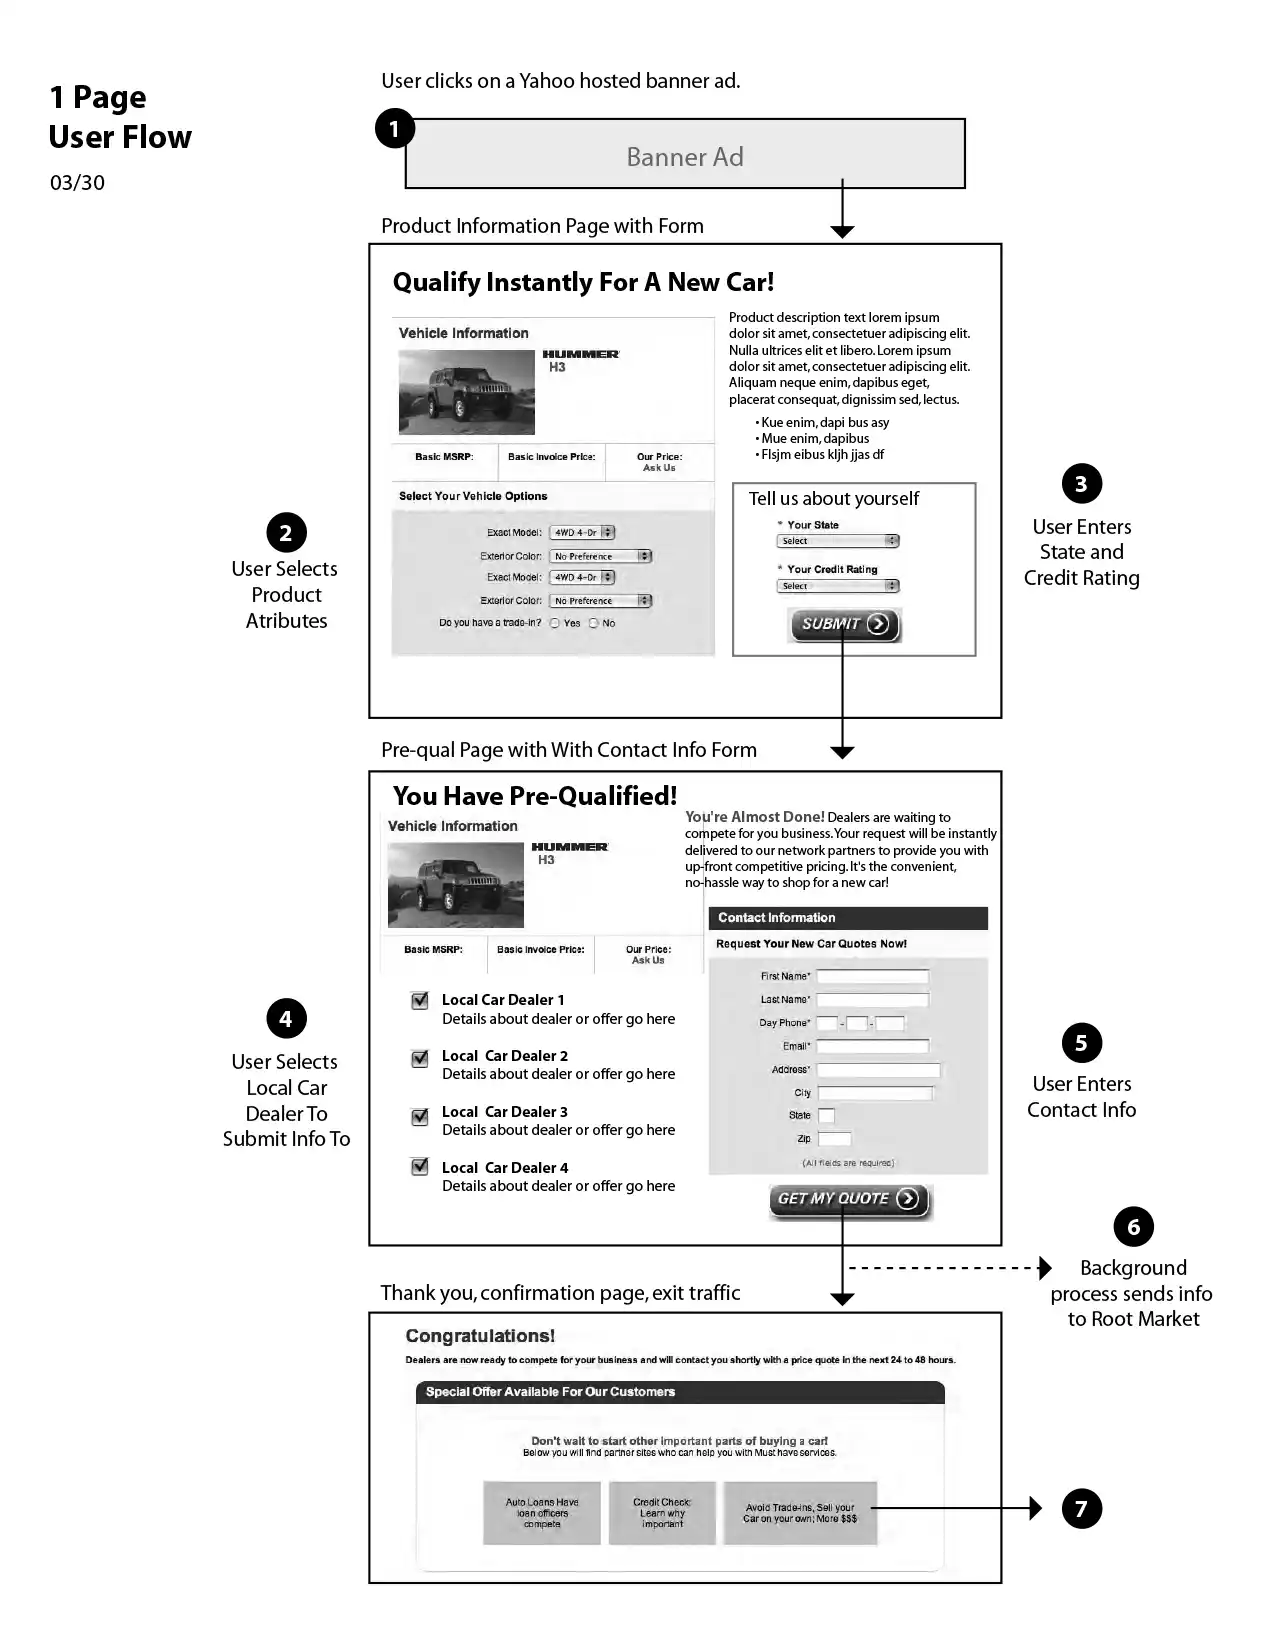 wireframe user flow image showing one-step process